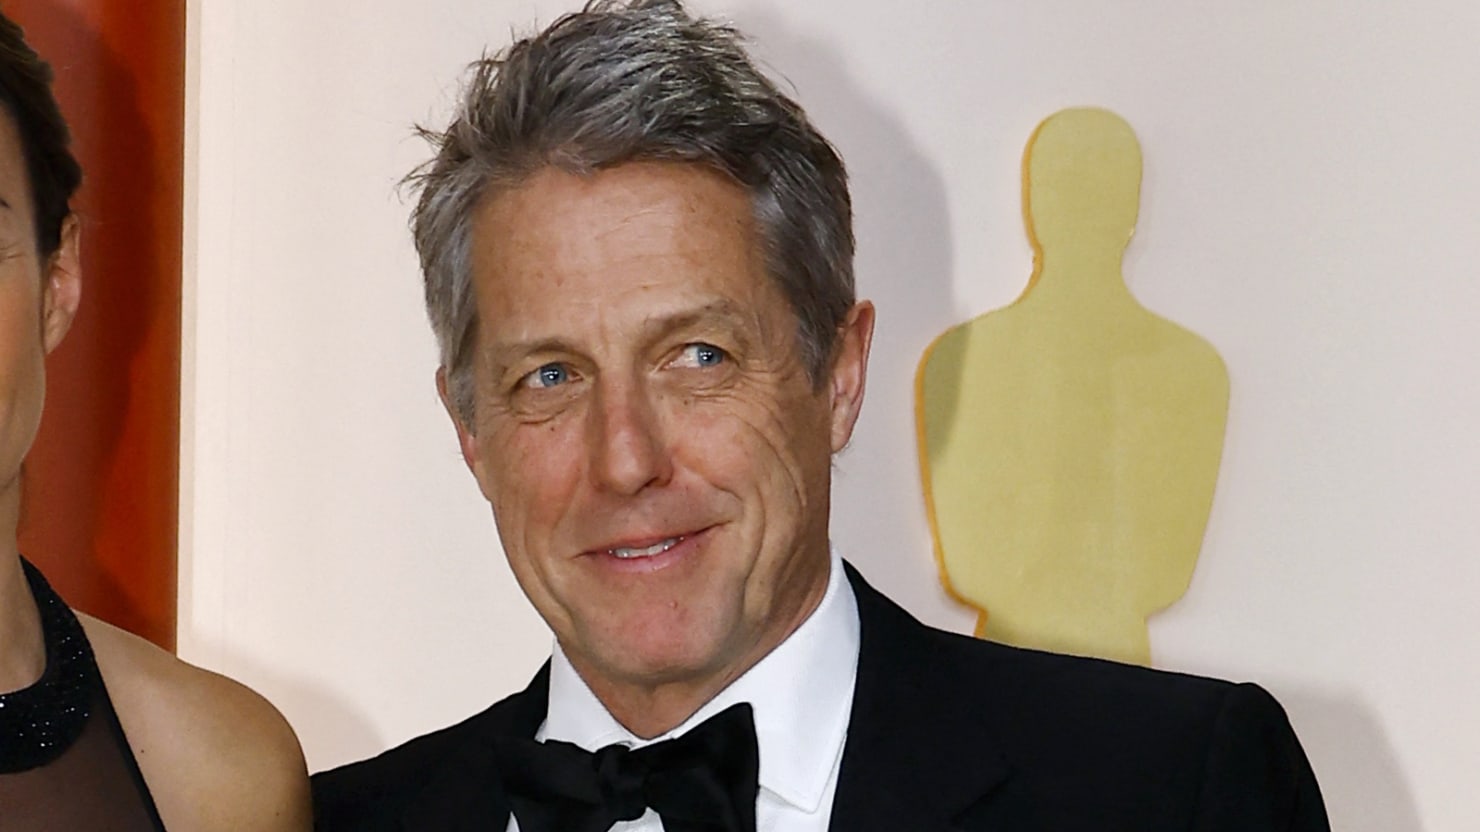 Hugh Grant’s Latest Viral Interview Involves Drew Barrymore’s Singing Voice